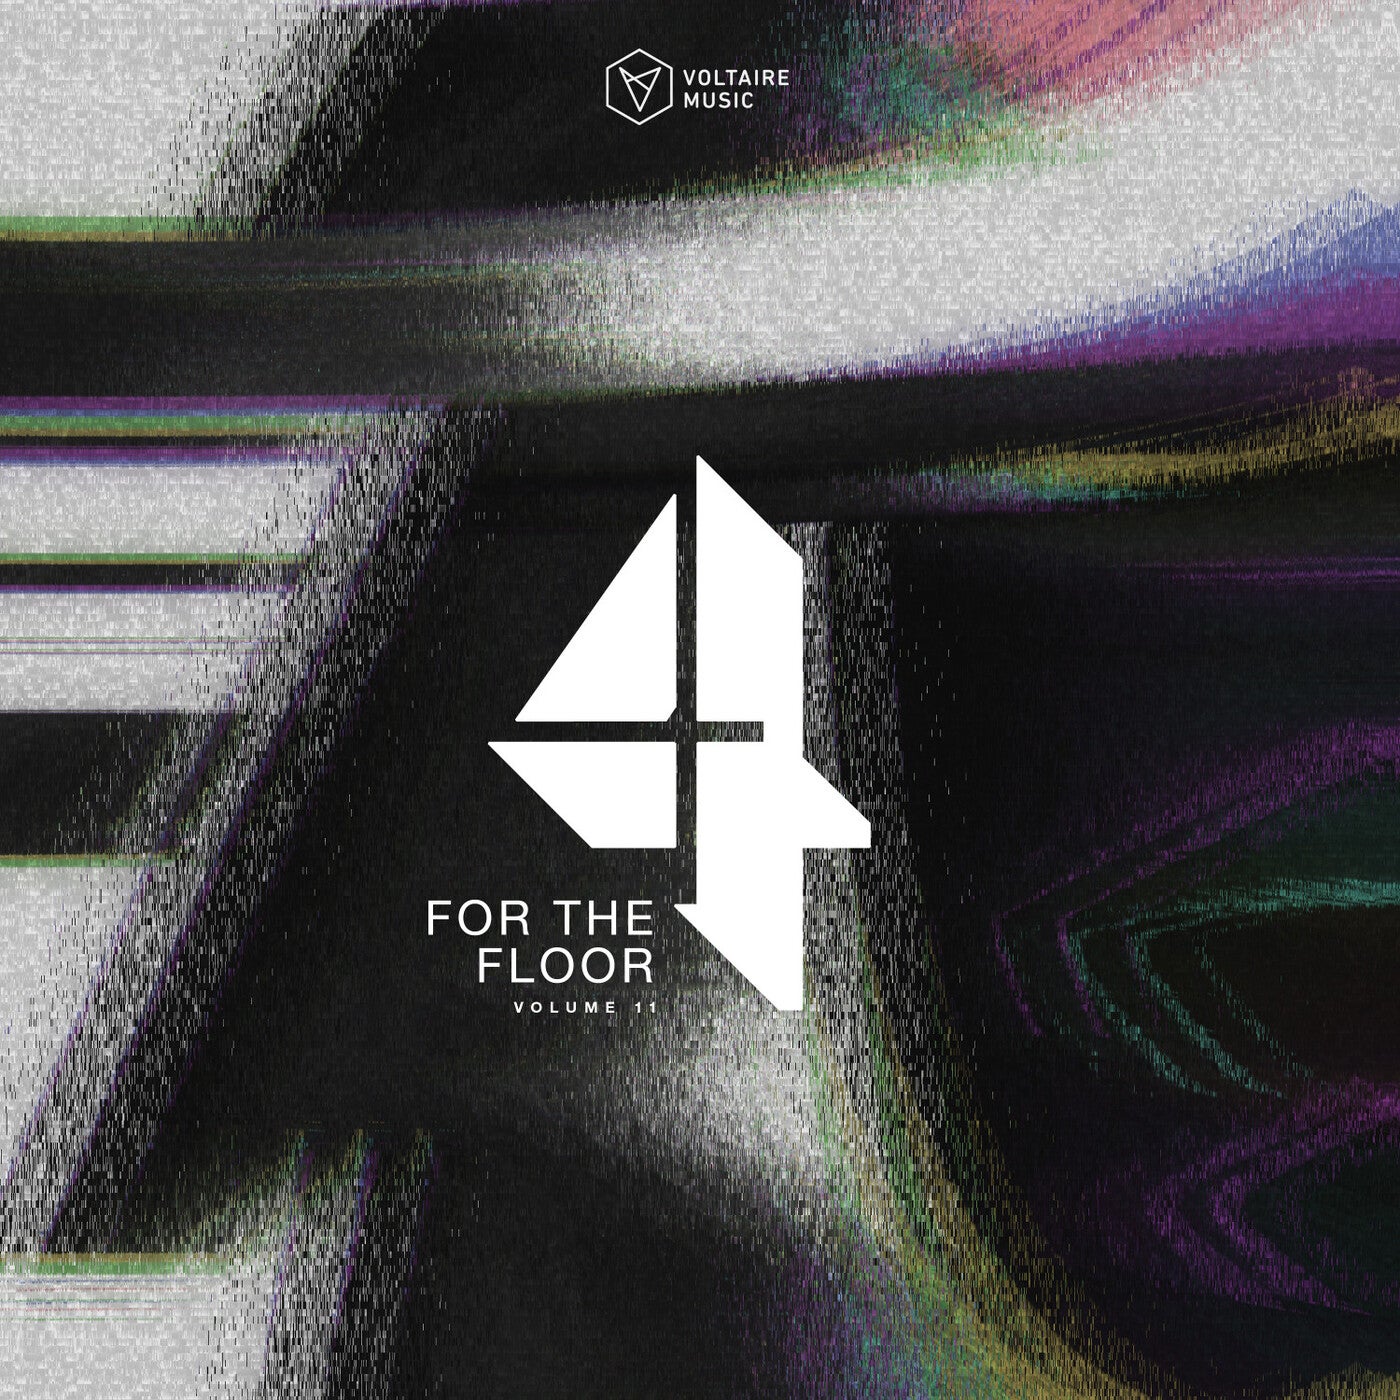 Voltaire Music pres. 4 For The Floor Vol. 11